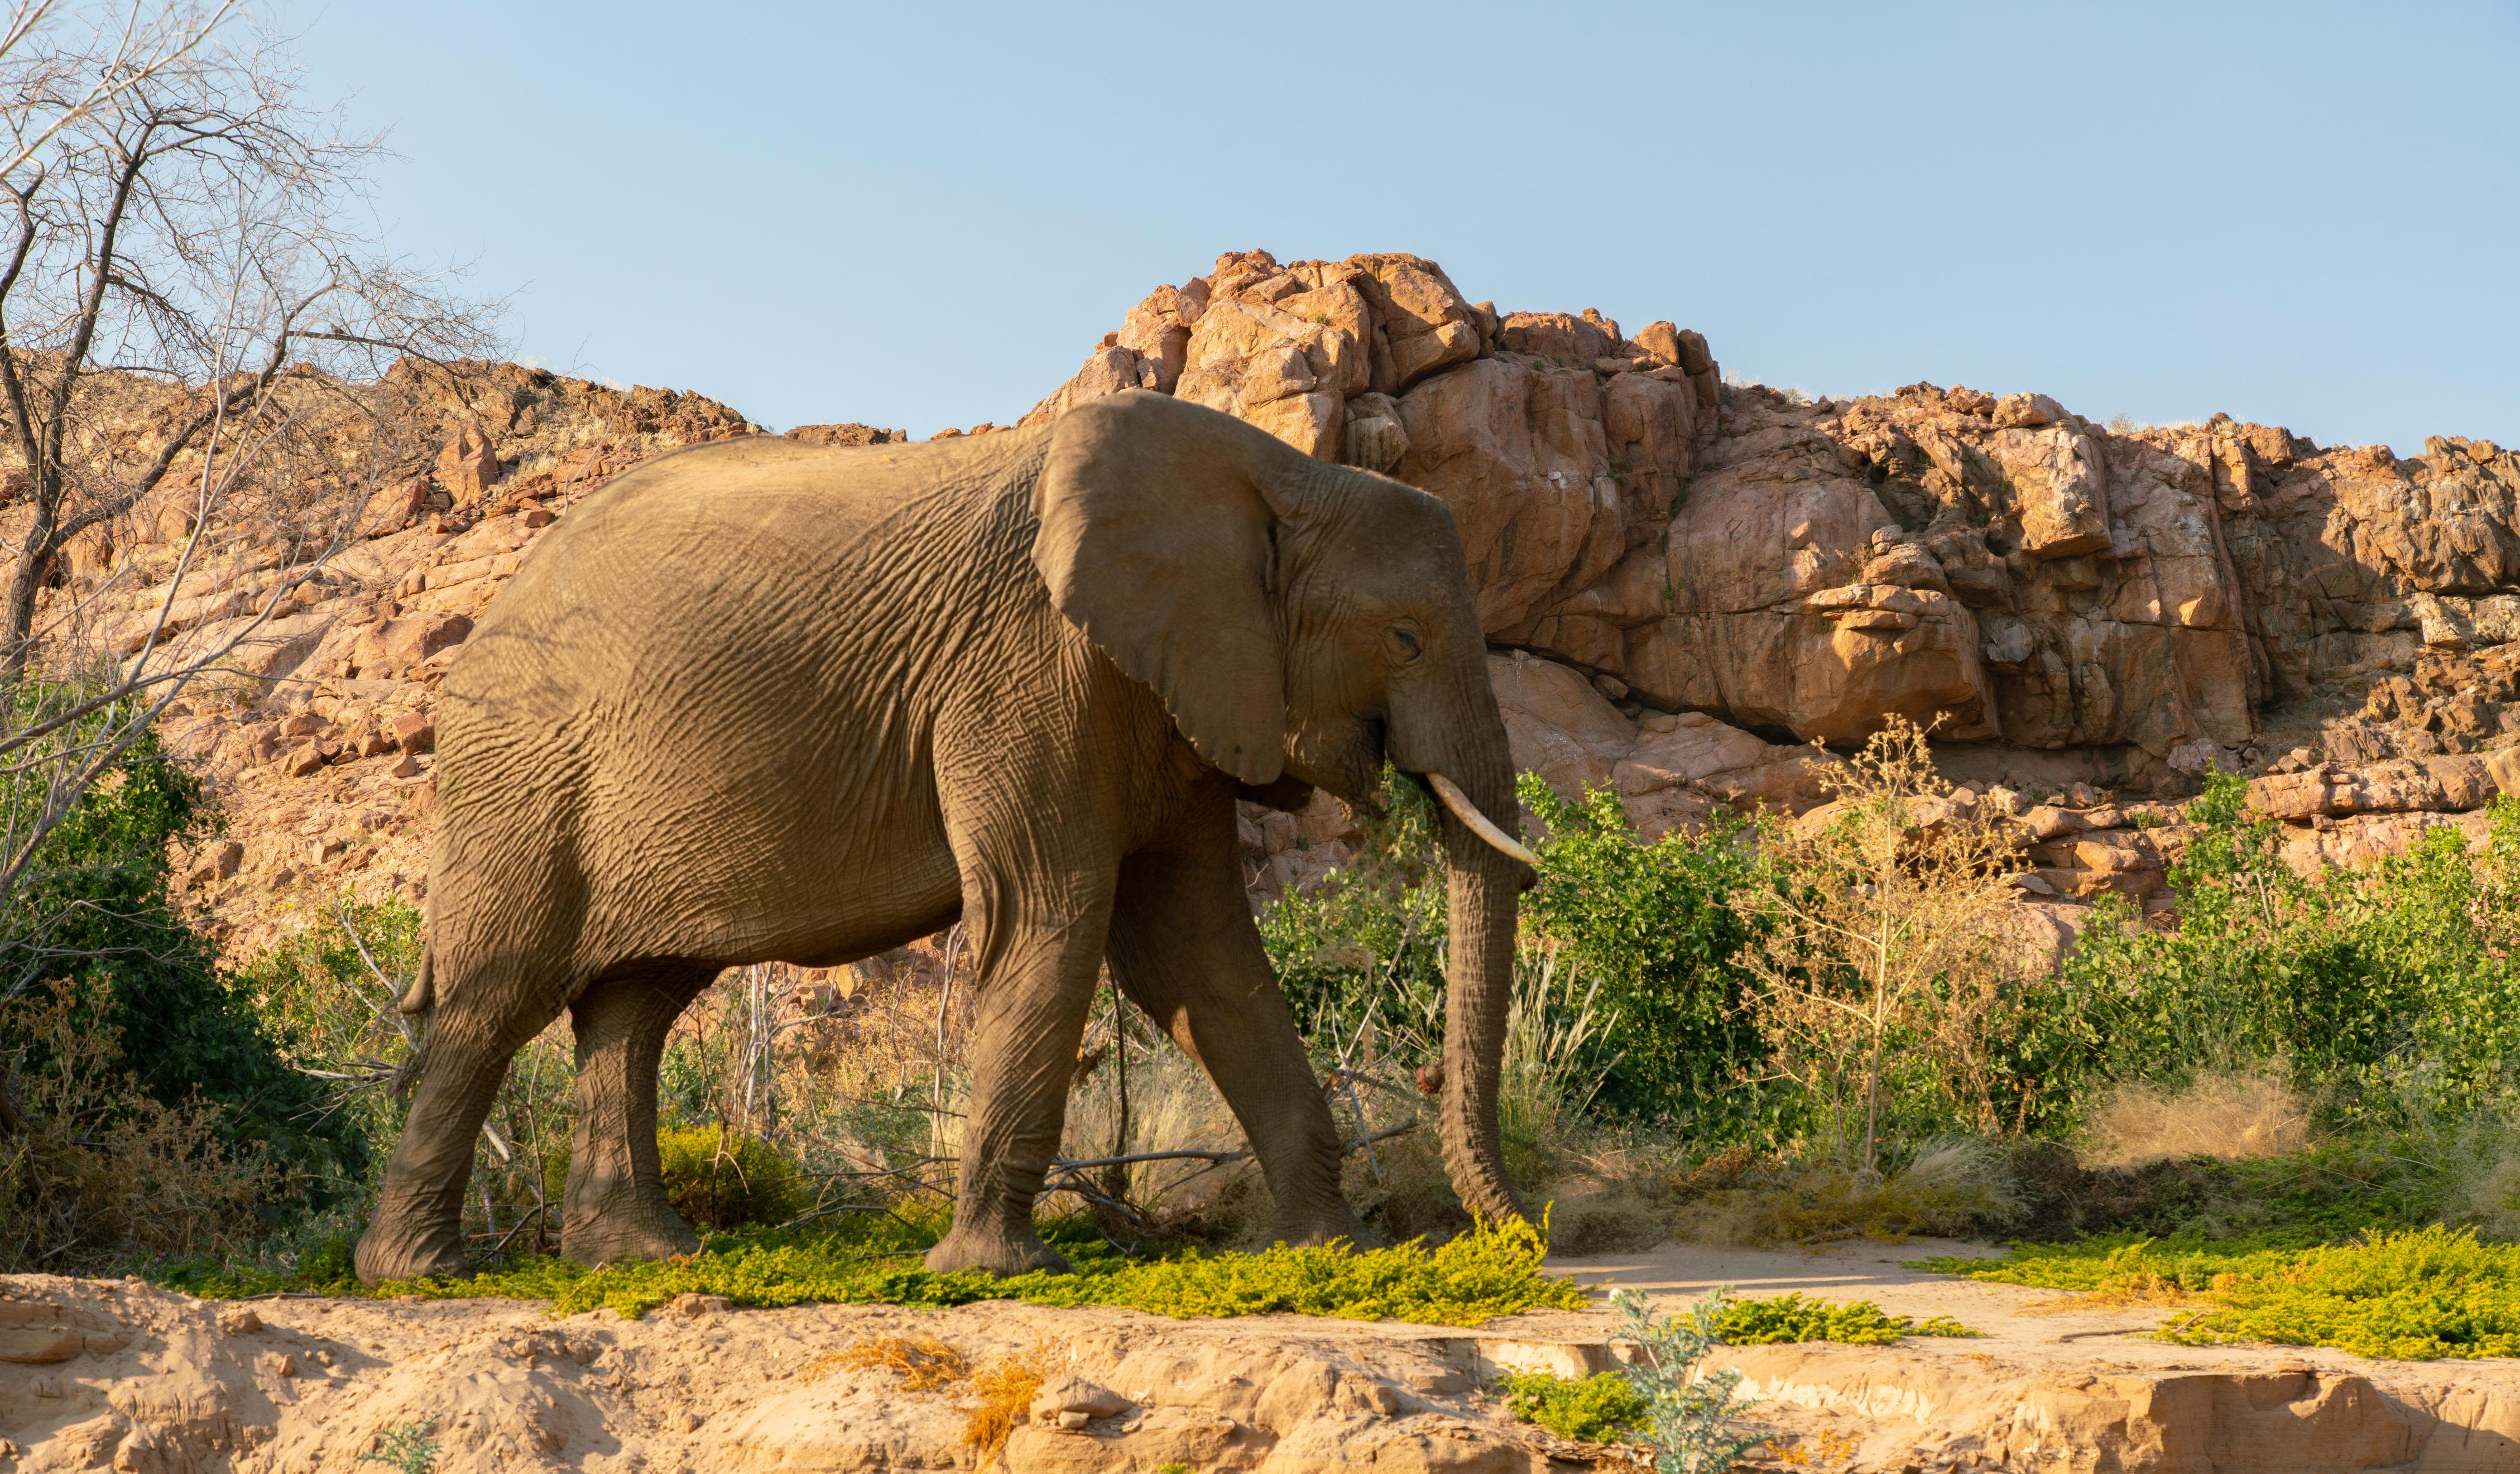 Desert elephants are finding friends in the drylands of Namibia | CNN